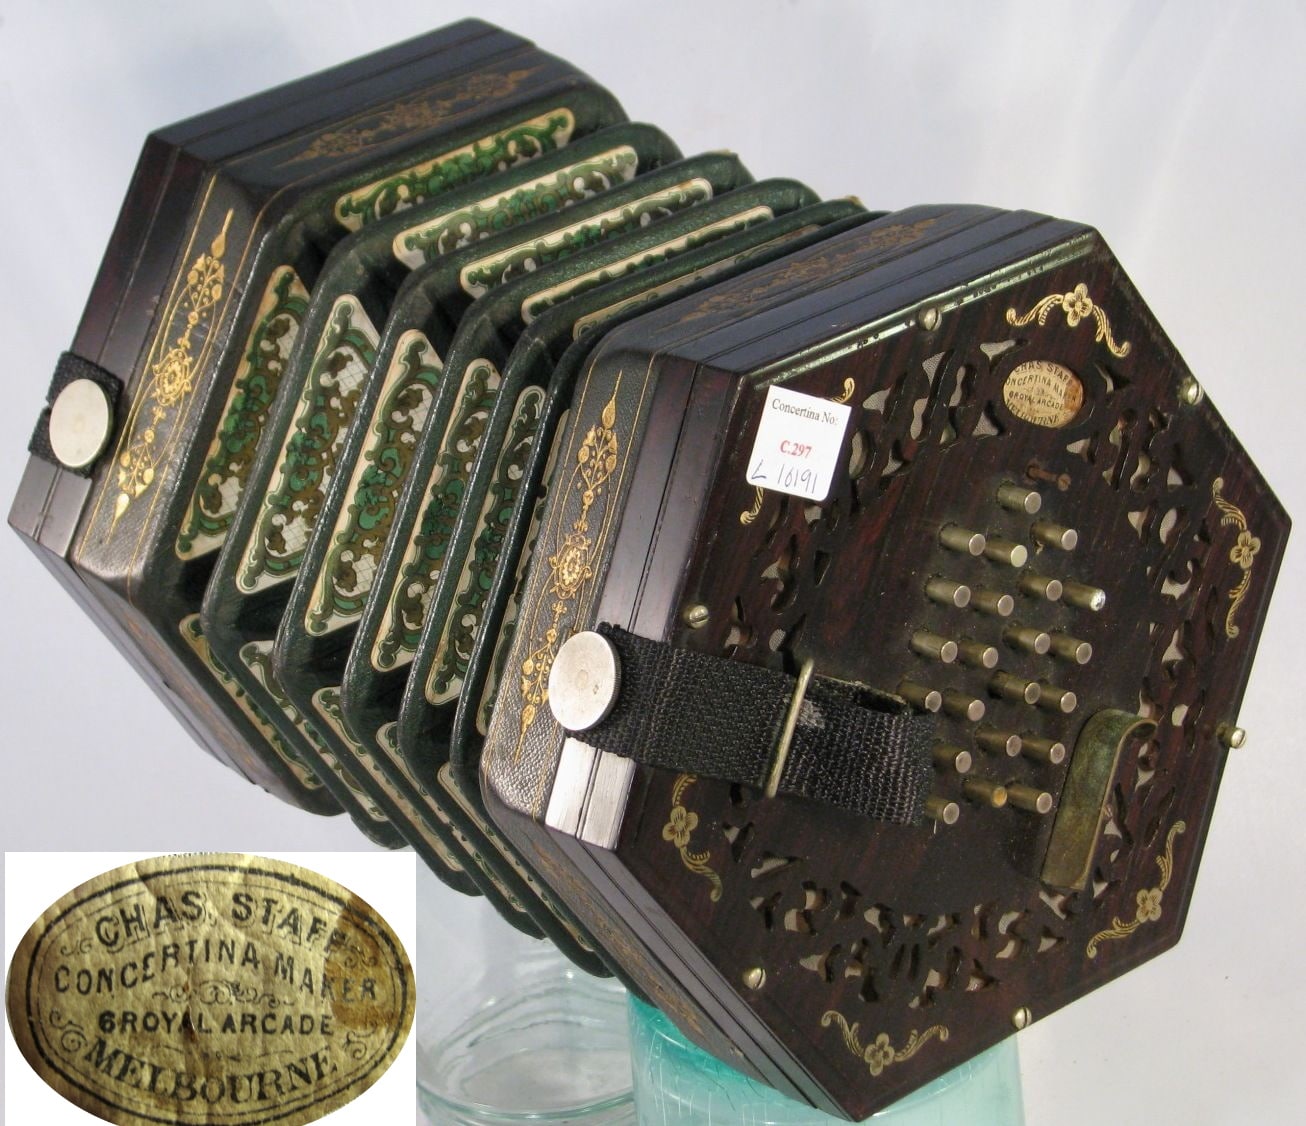 Anglo German concertina, with label: Charles Staff, concertina maker, Royal Arcade, Melbourne (private collection)